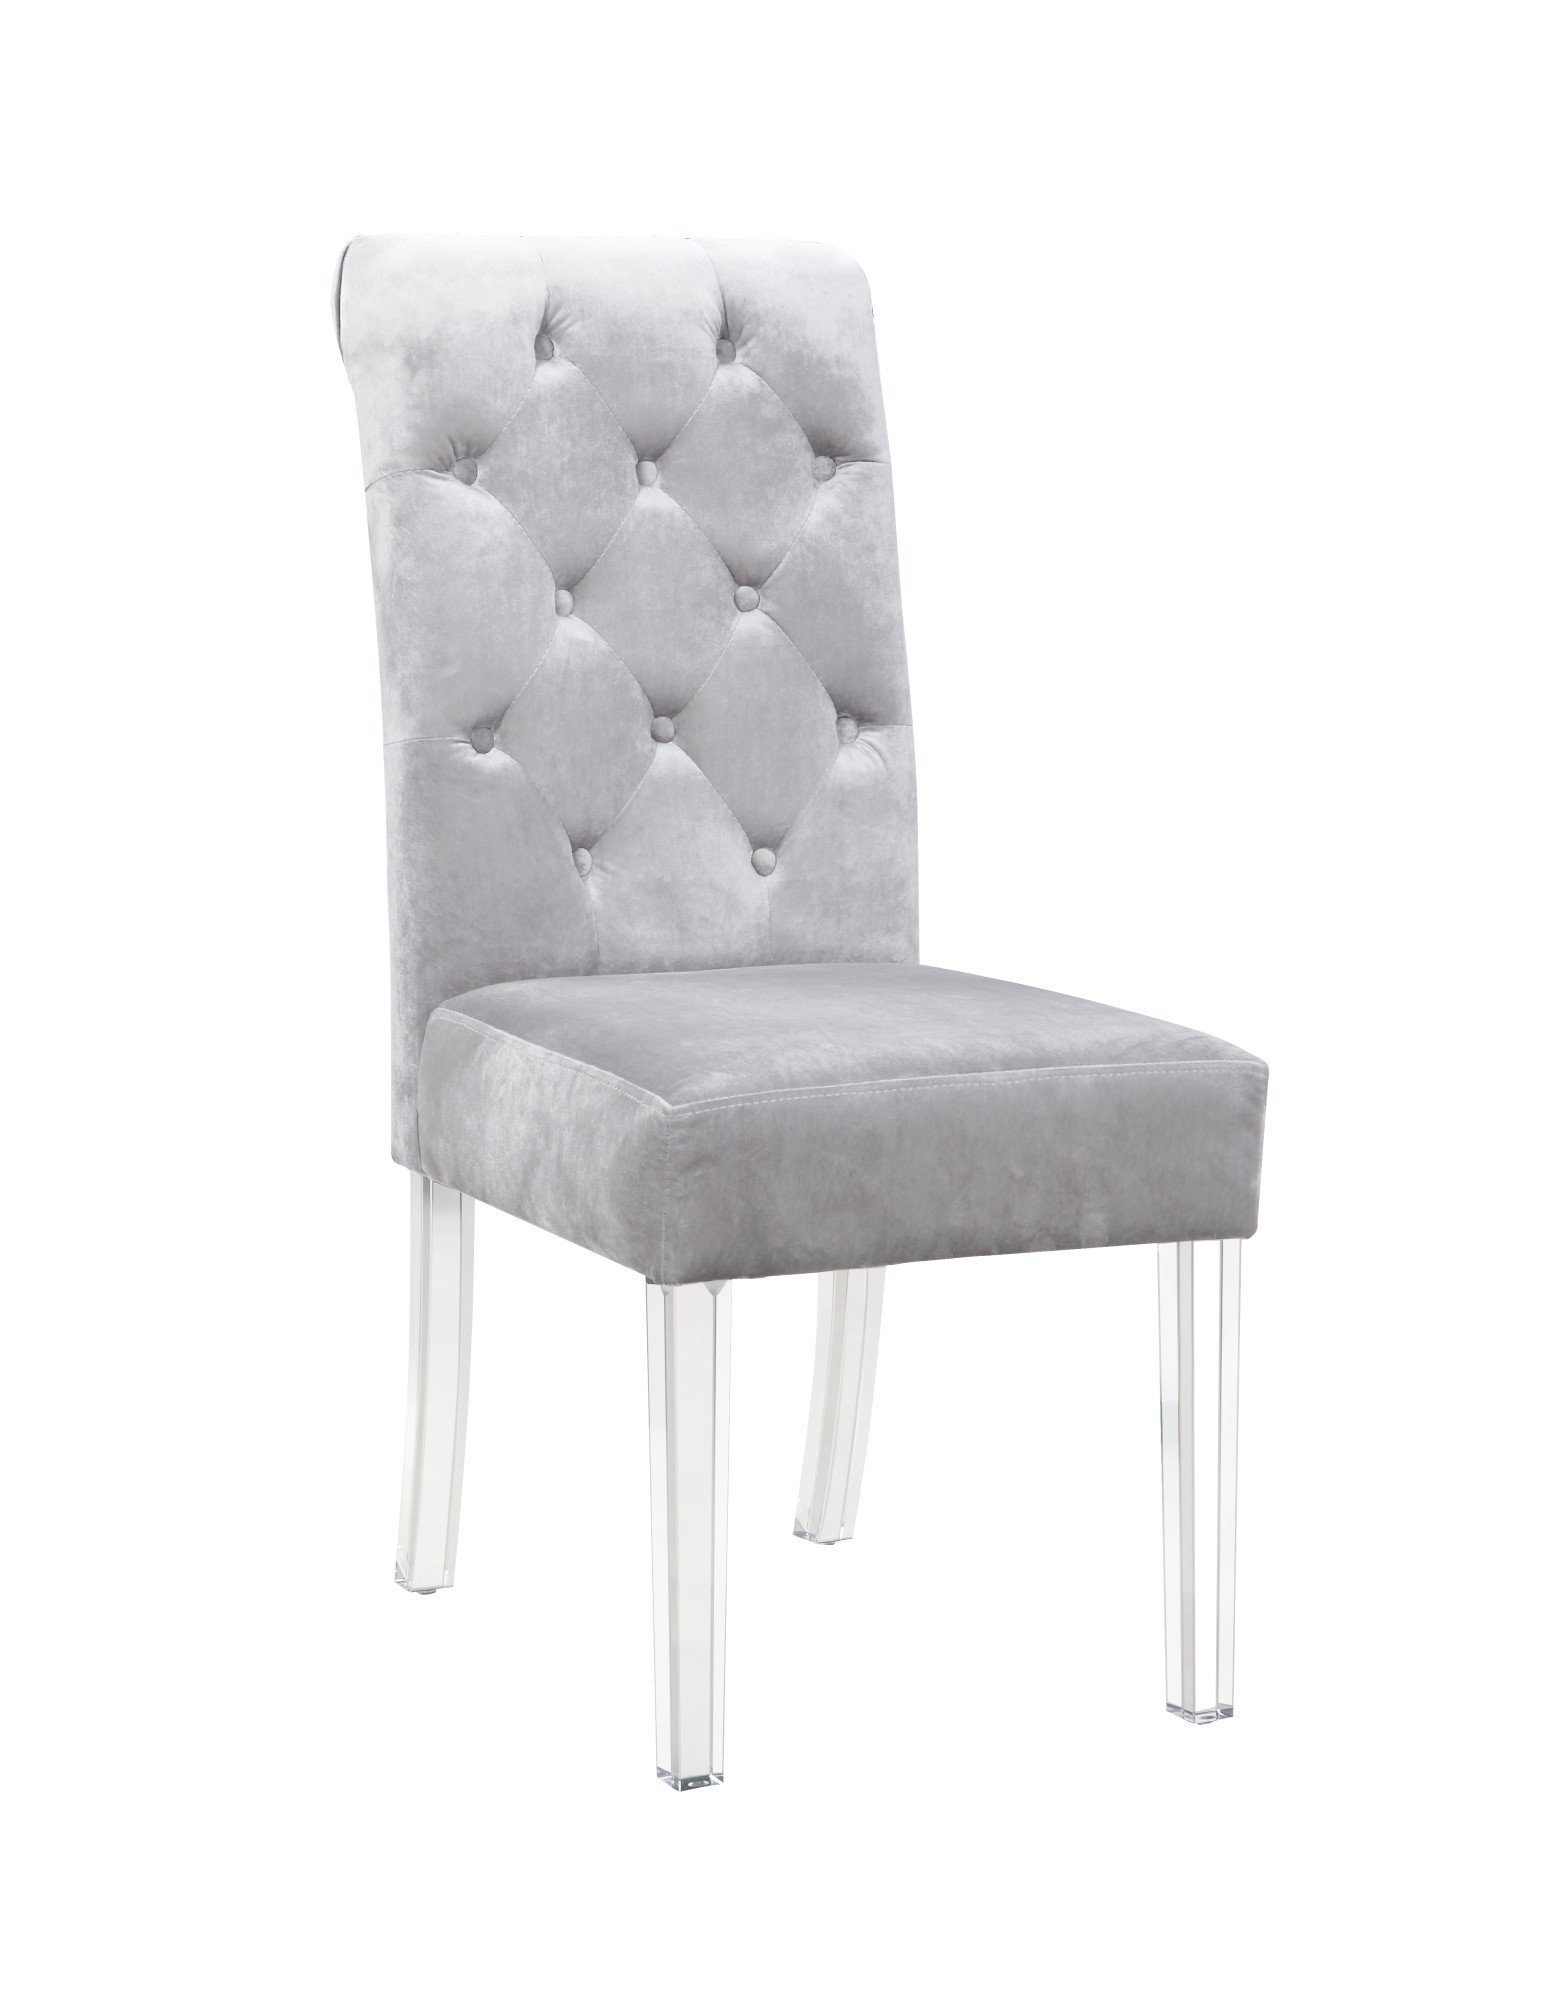 Iconic Home Sharon Dining Side Chair Button Tufted Velvet Upholstered Acrylic Legs (Set of 2) Modern Contemporary, Silver